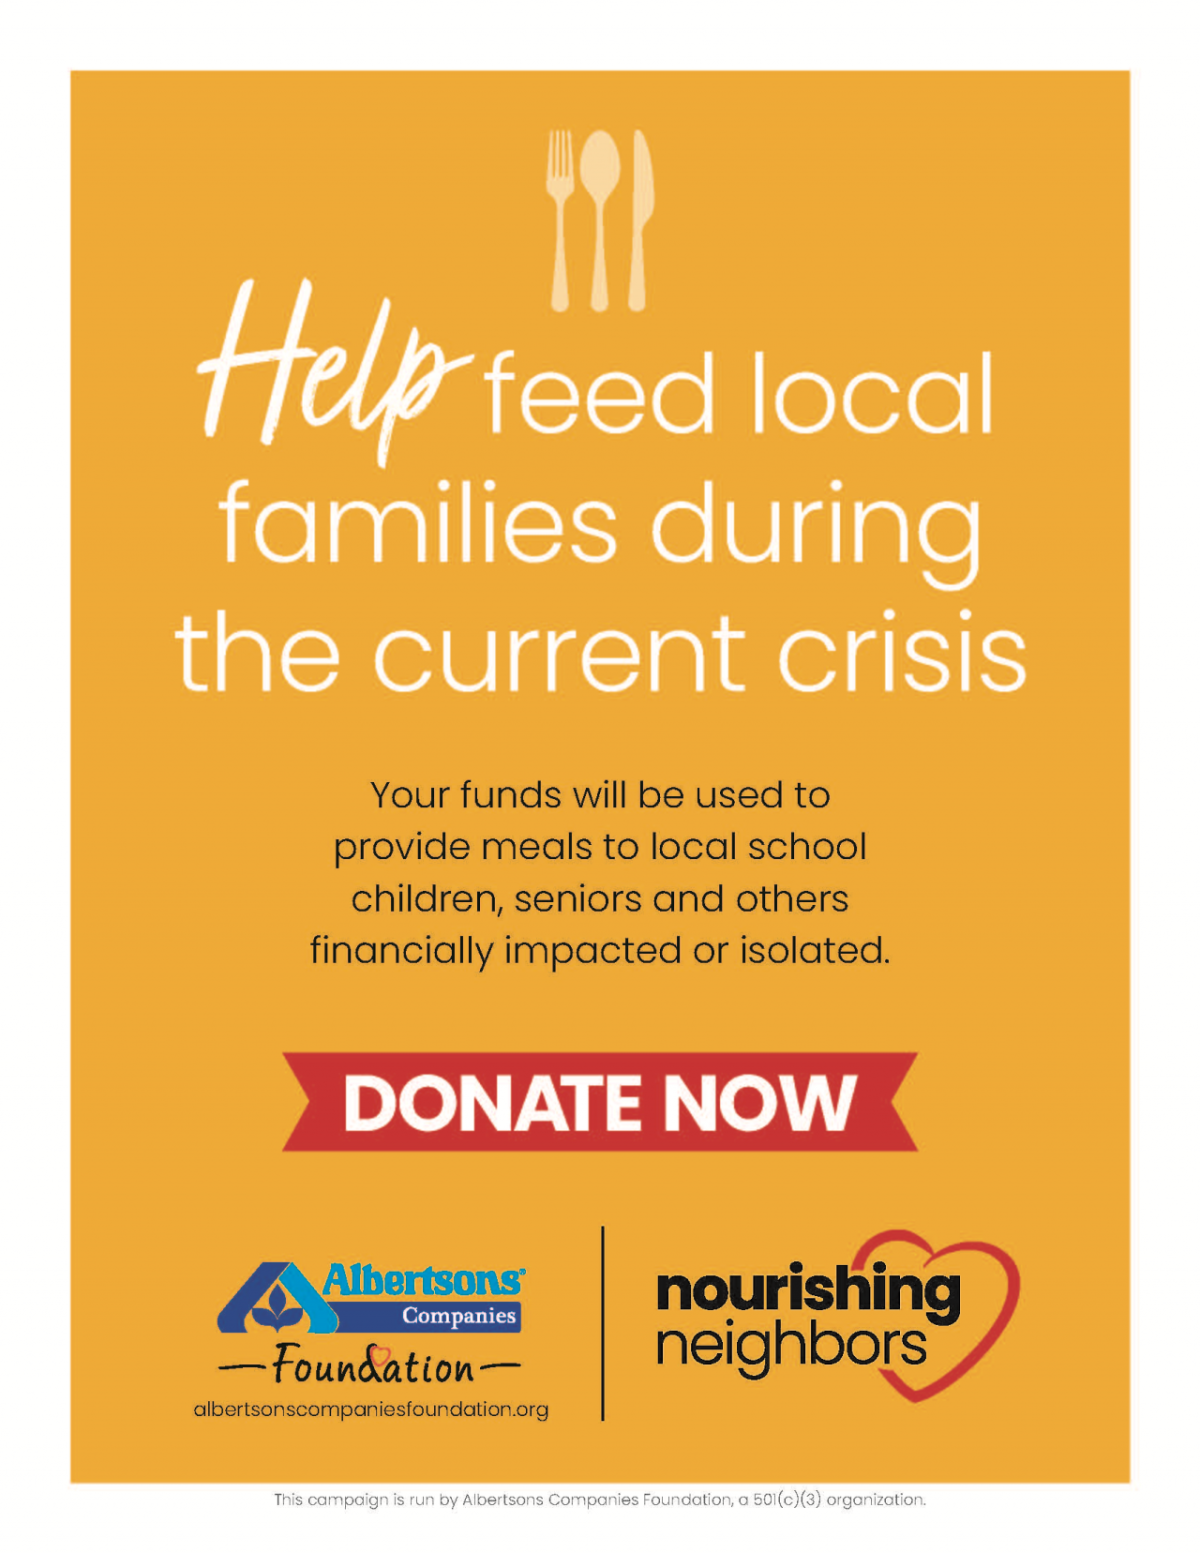 Help feed local families during the current crisis.